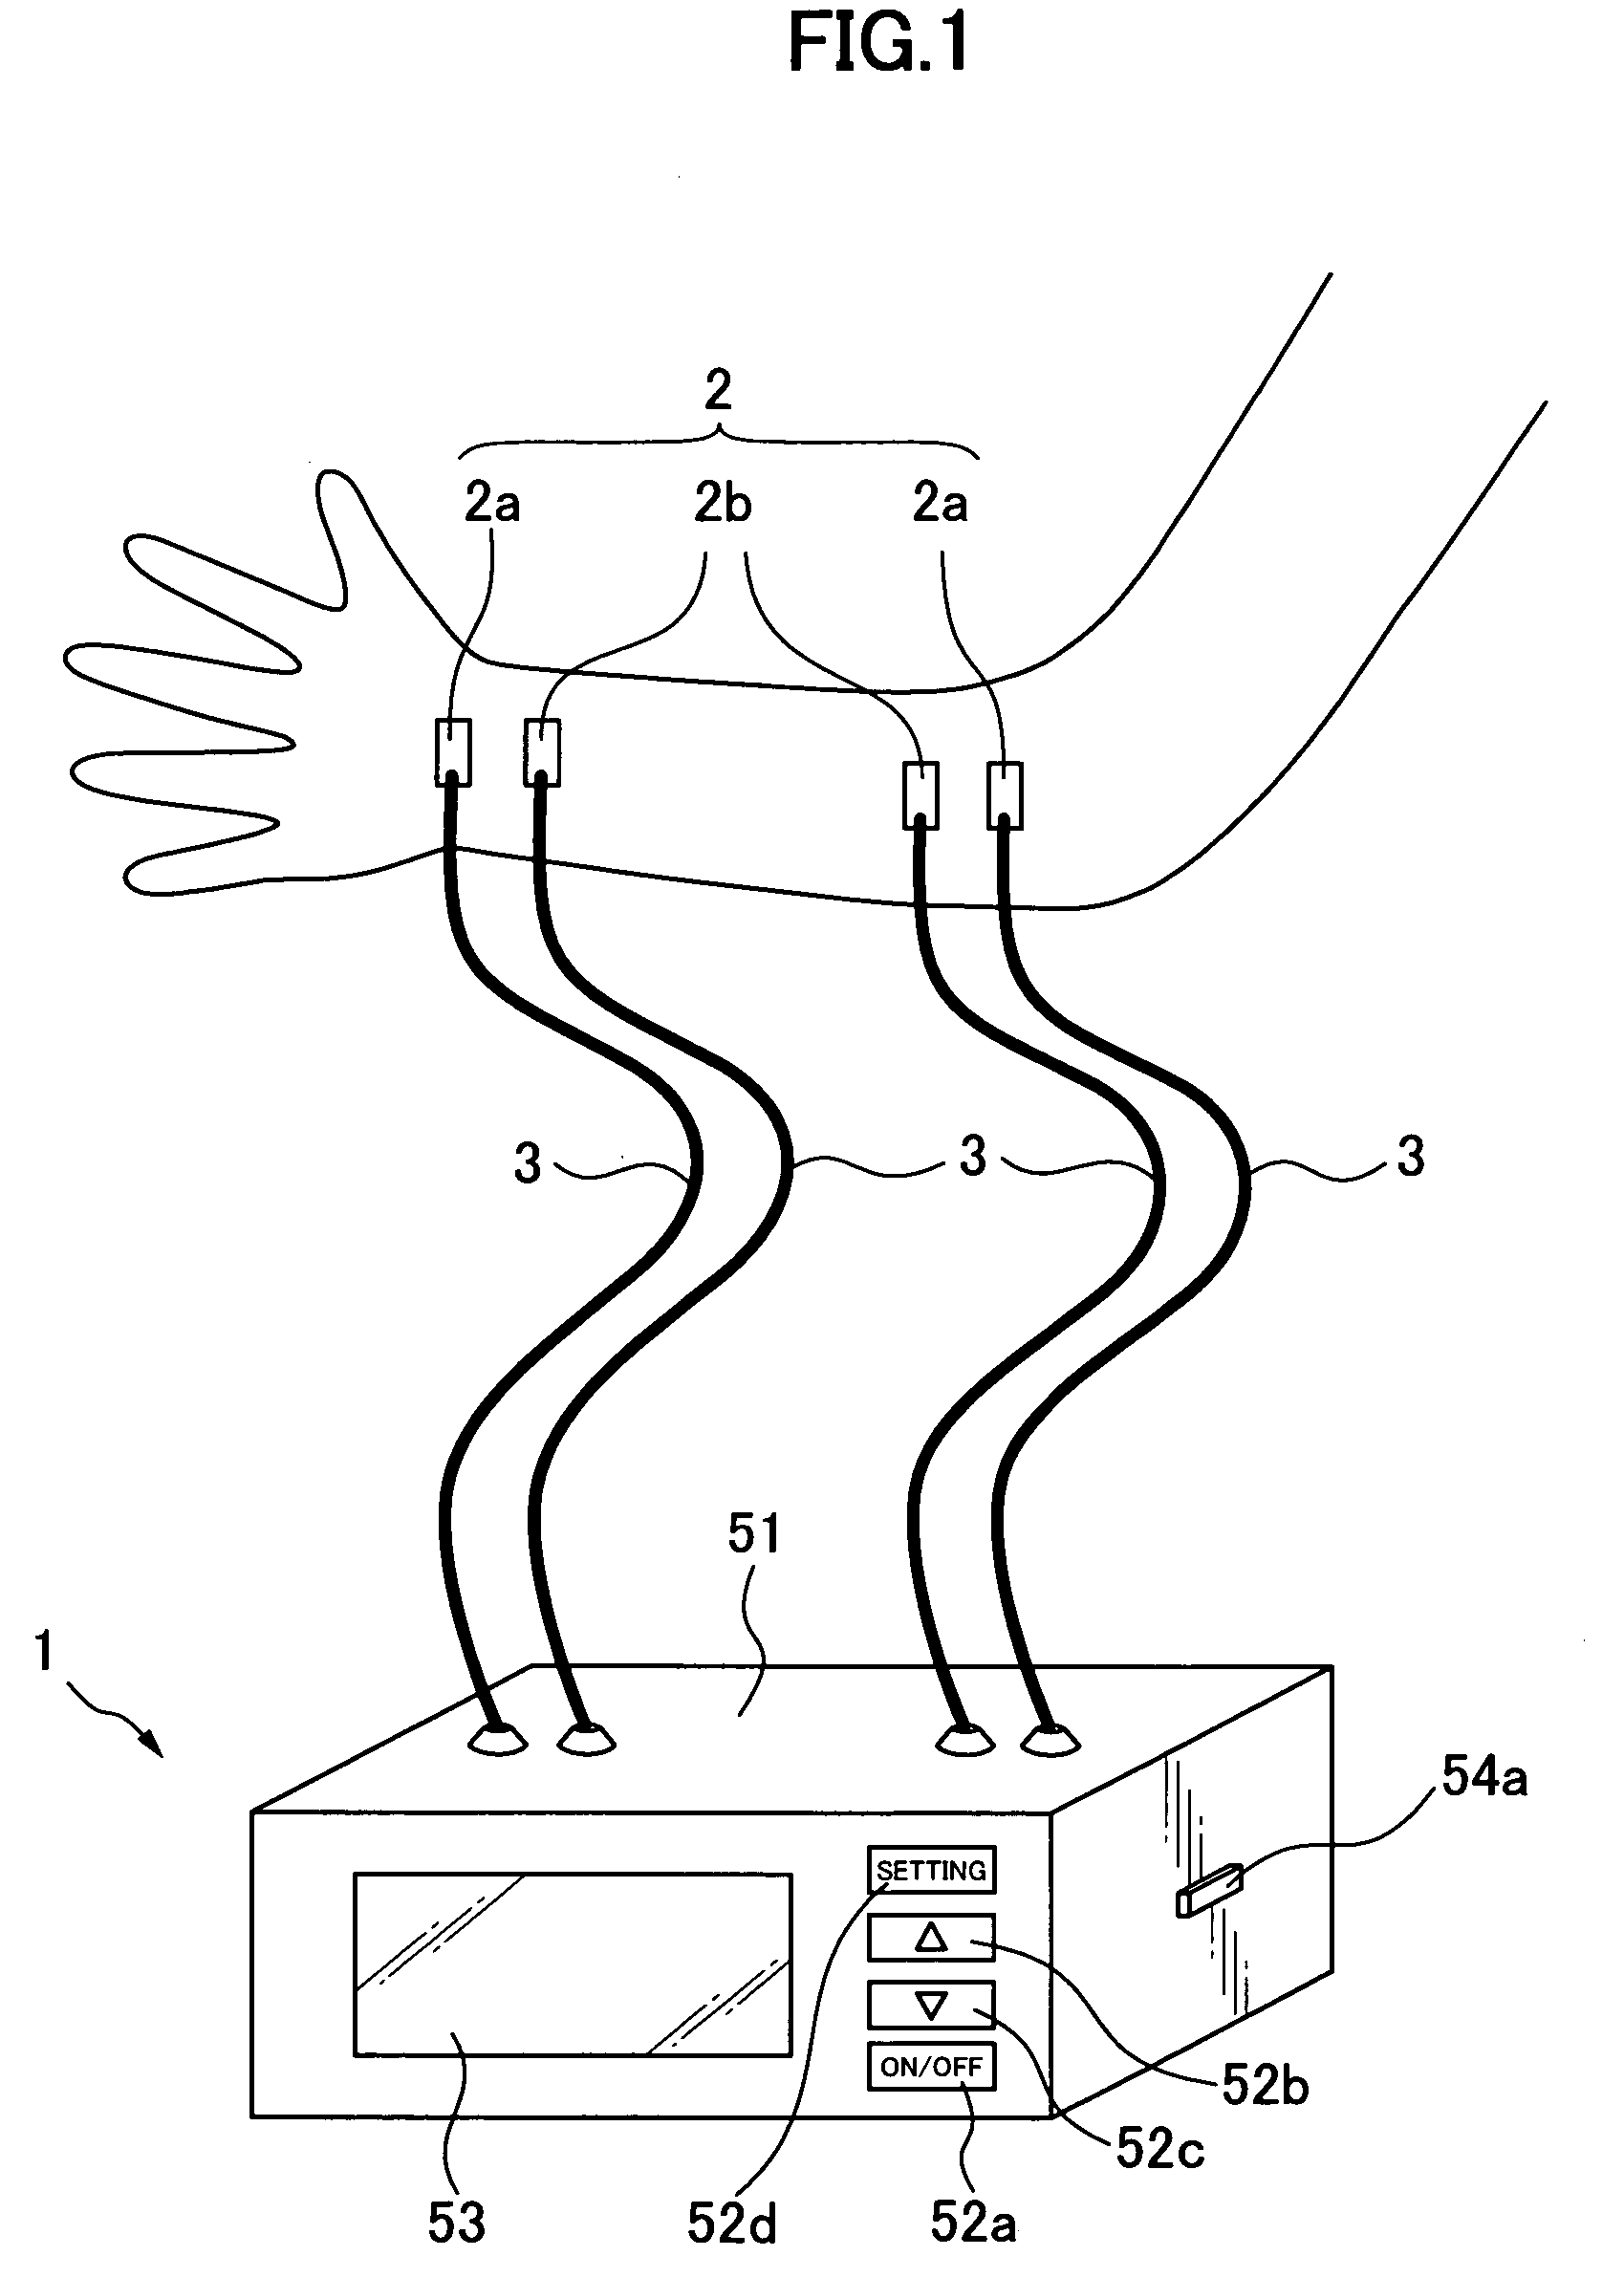 Impedance based muscular strength measuring device